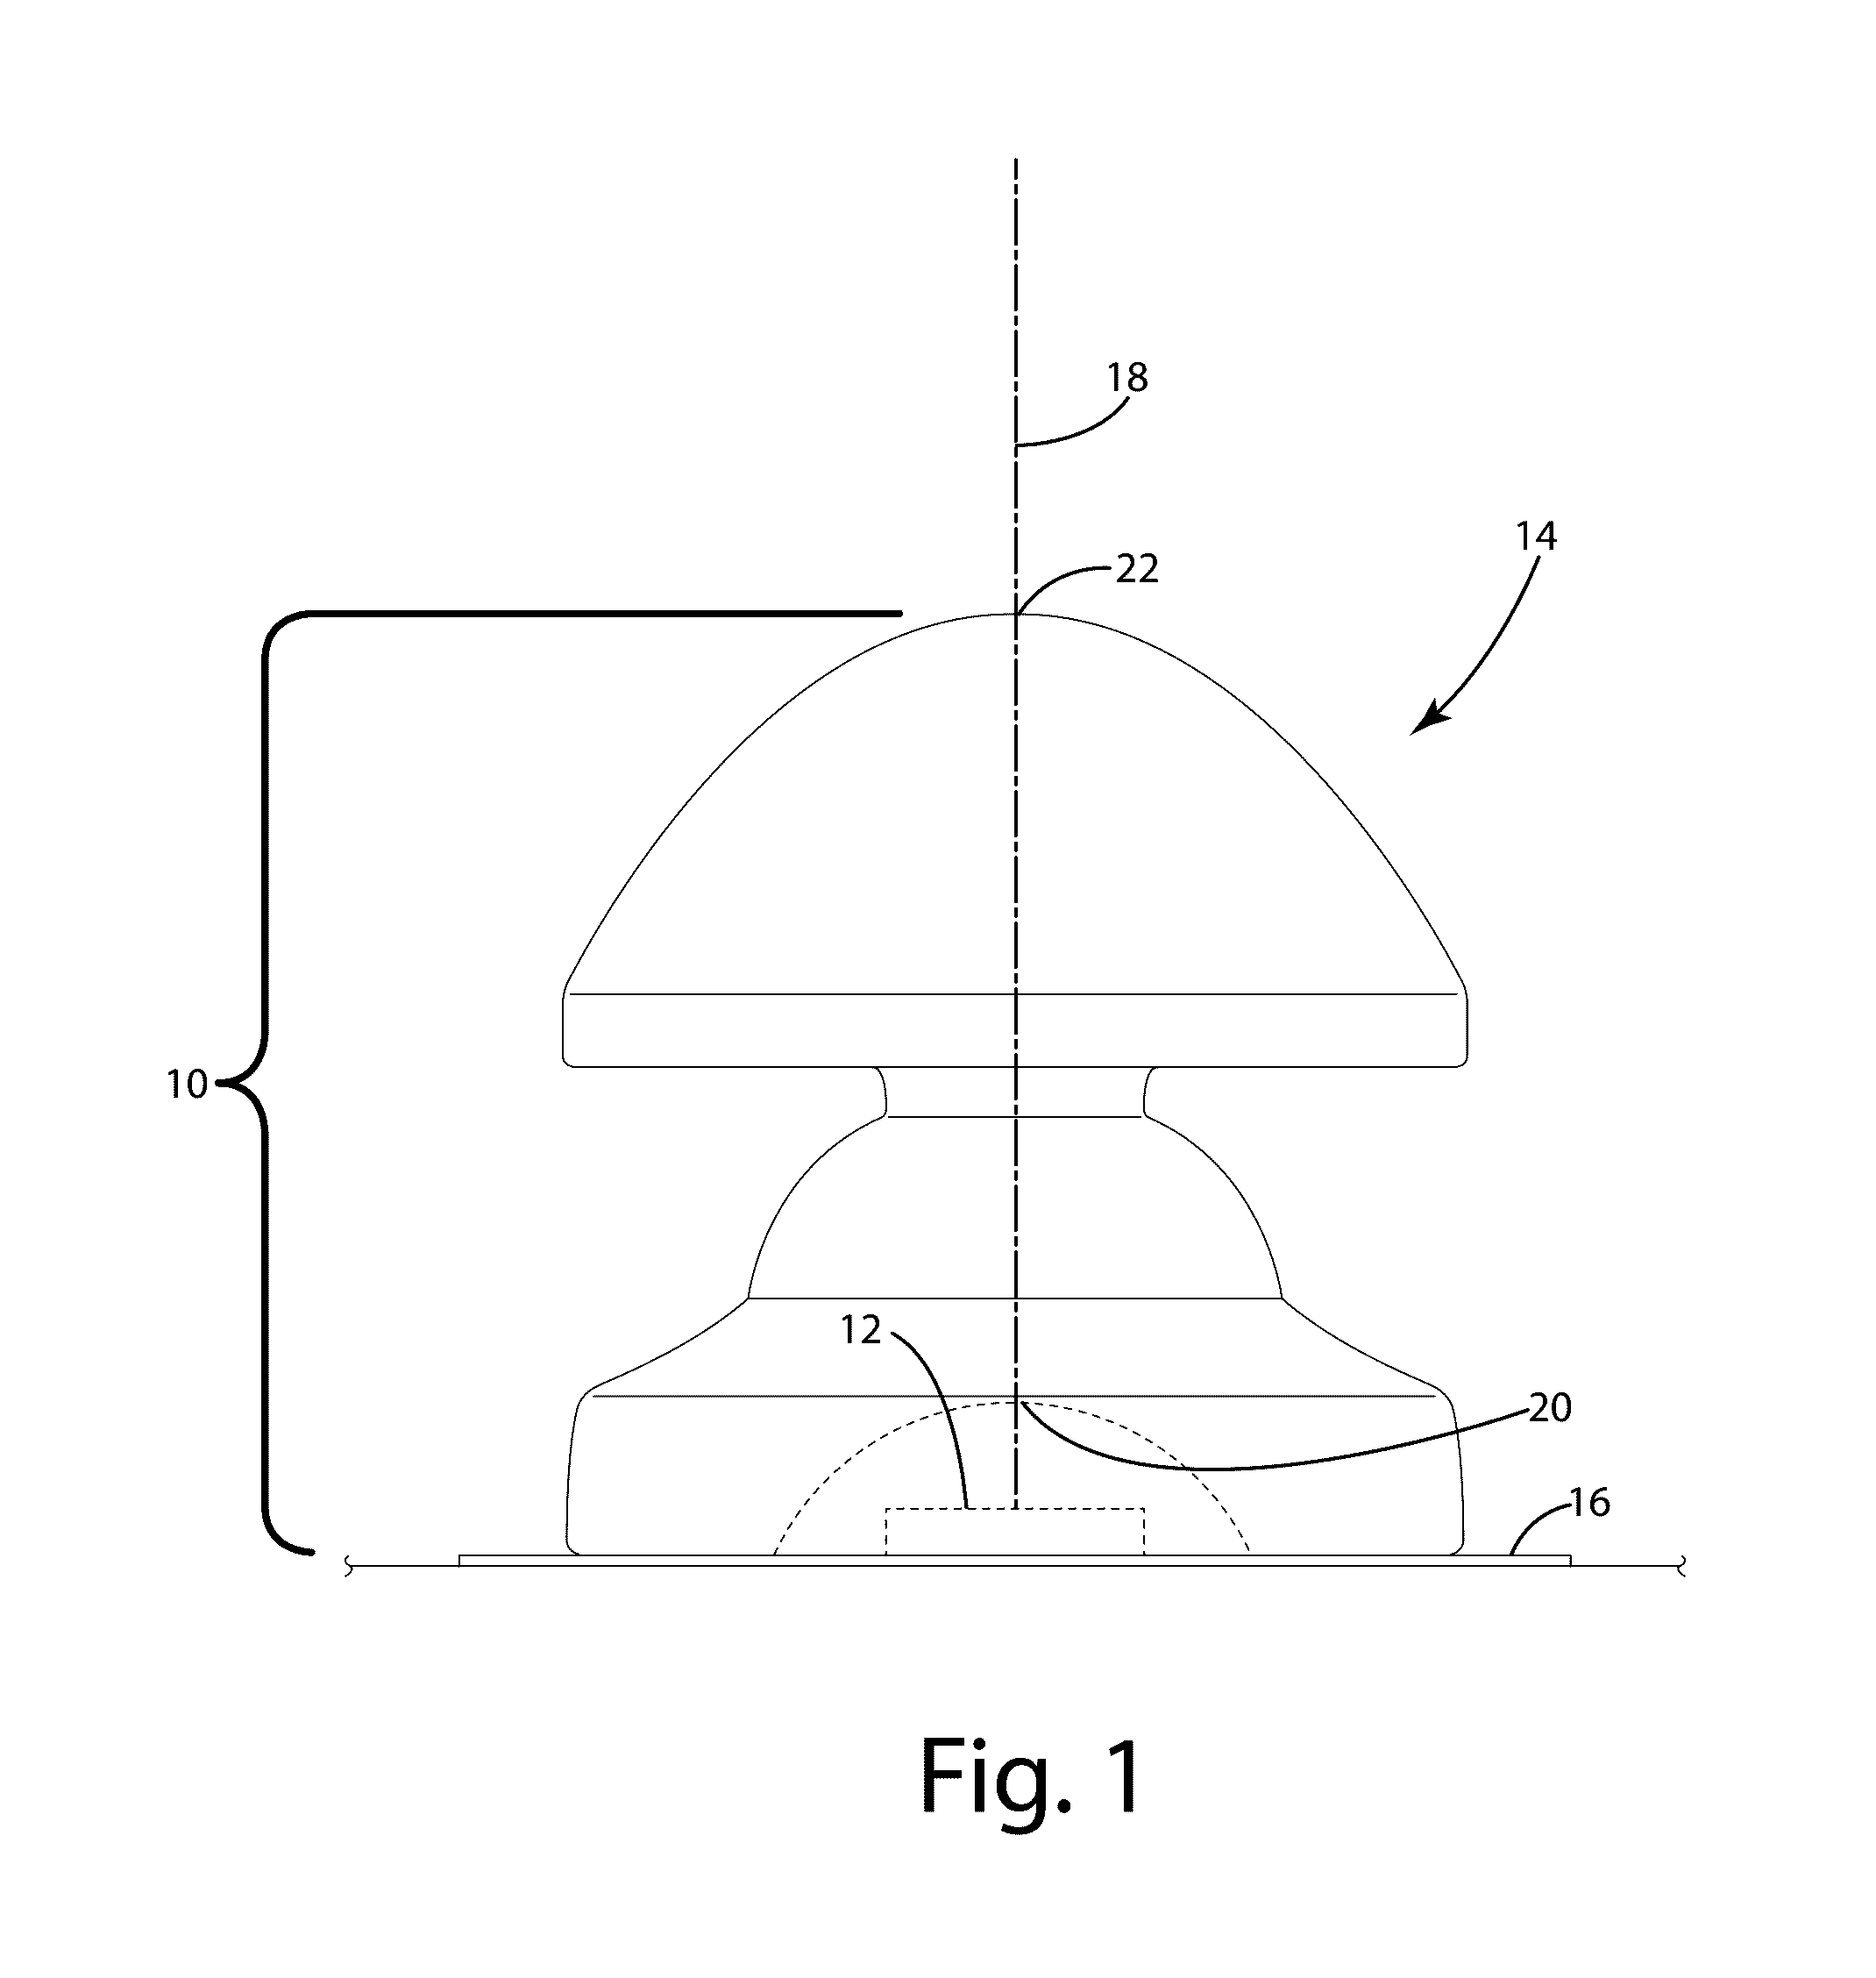 Compound lens for use with illumination sources in optical systems